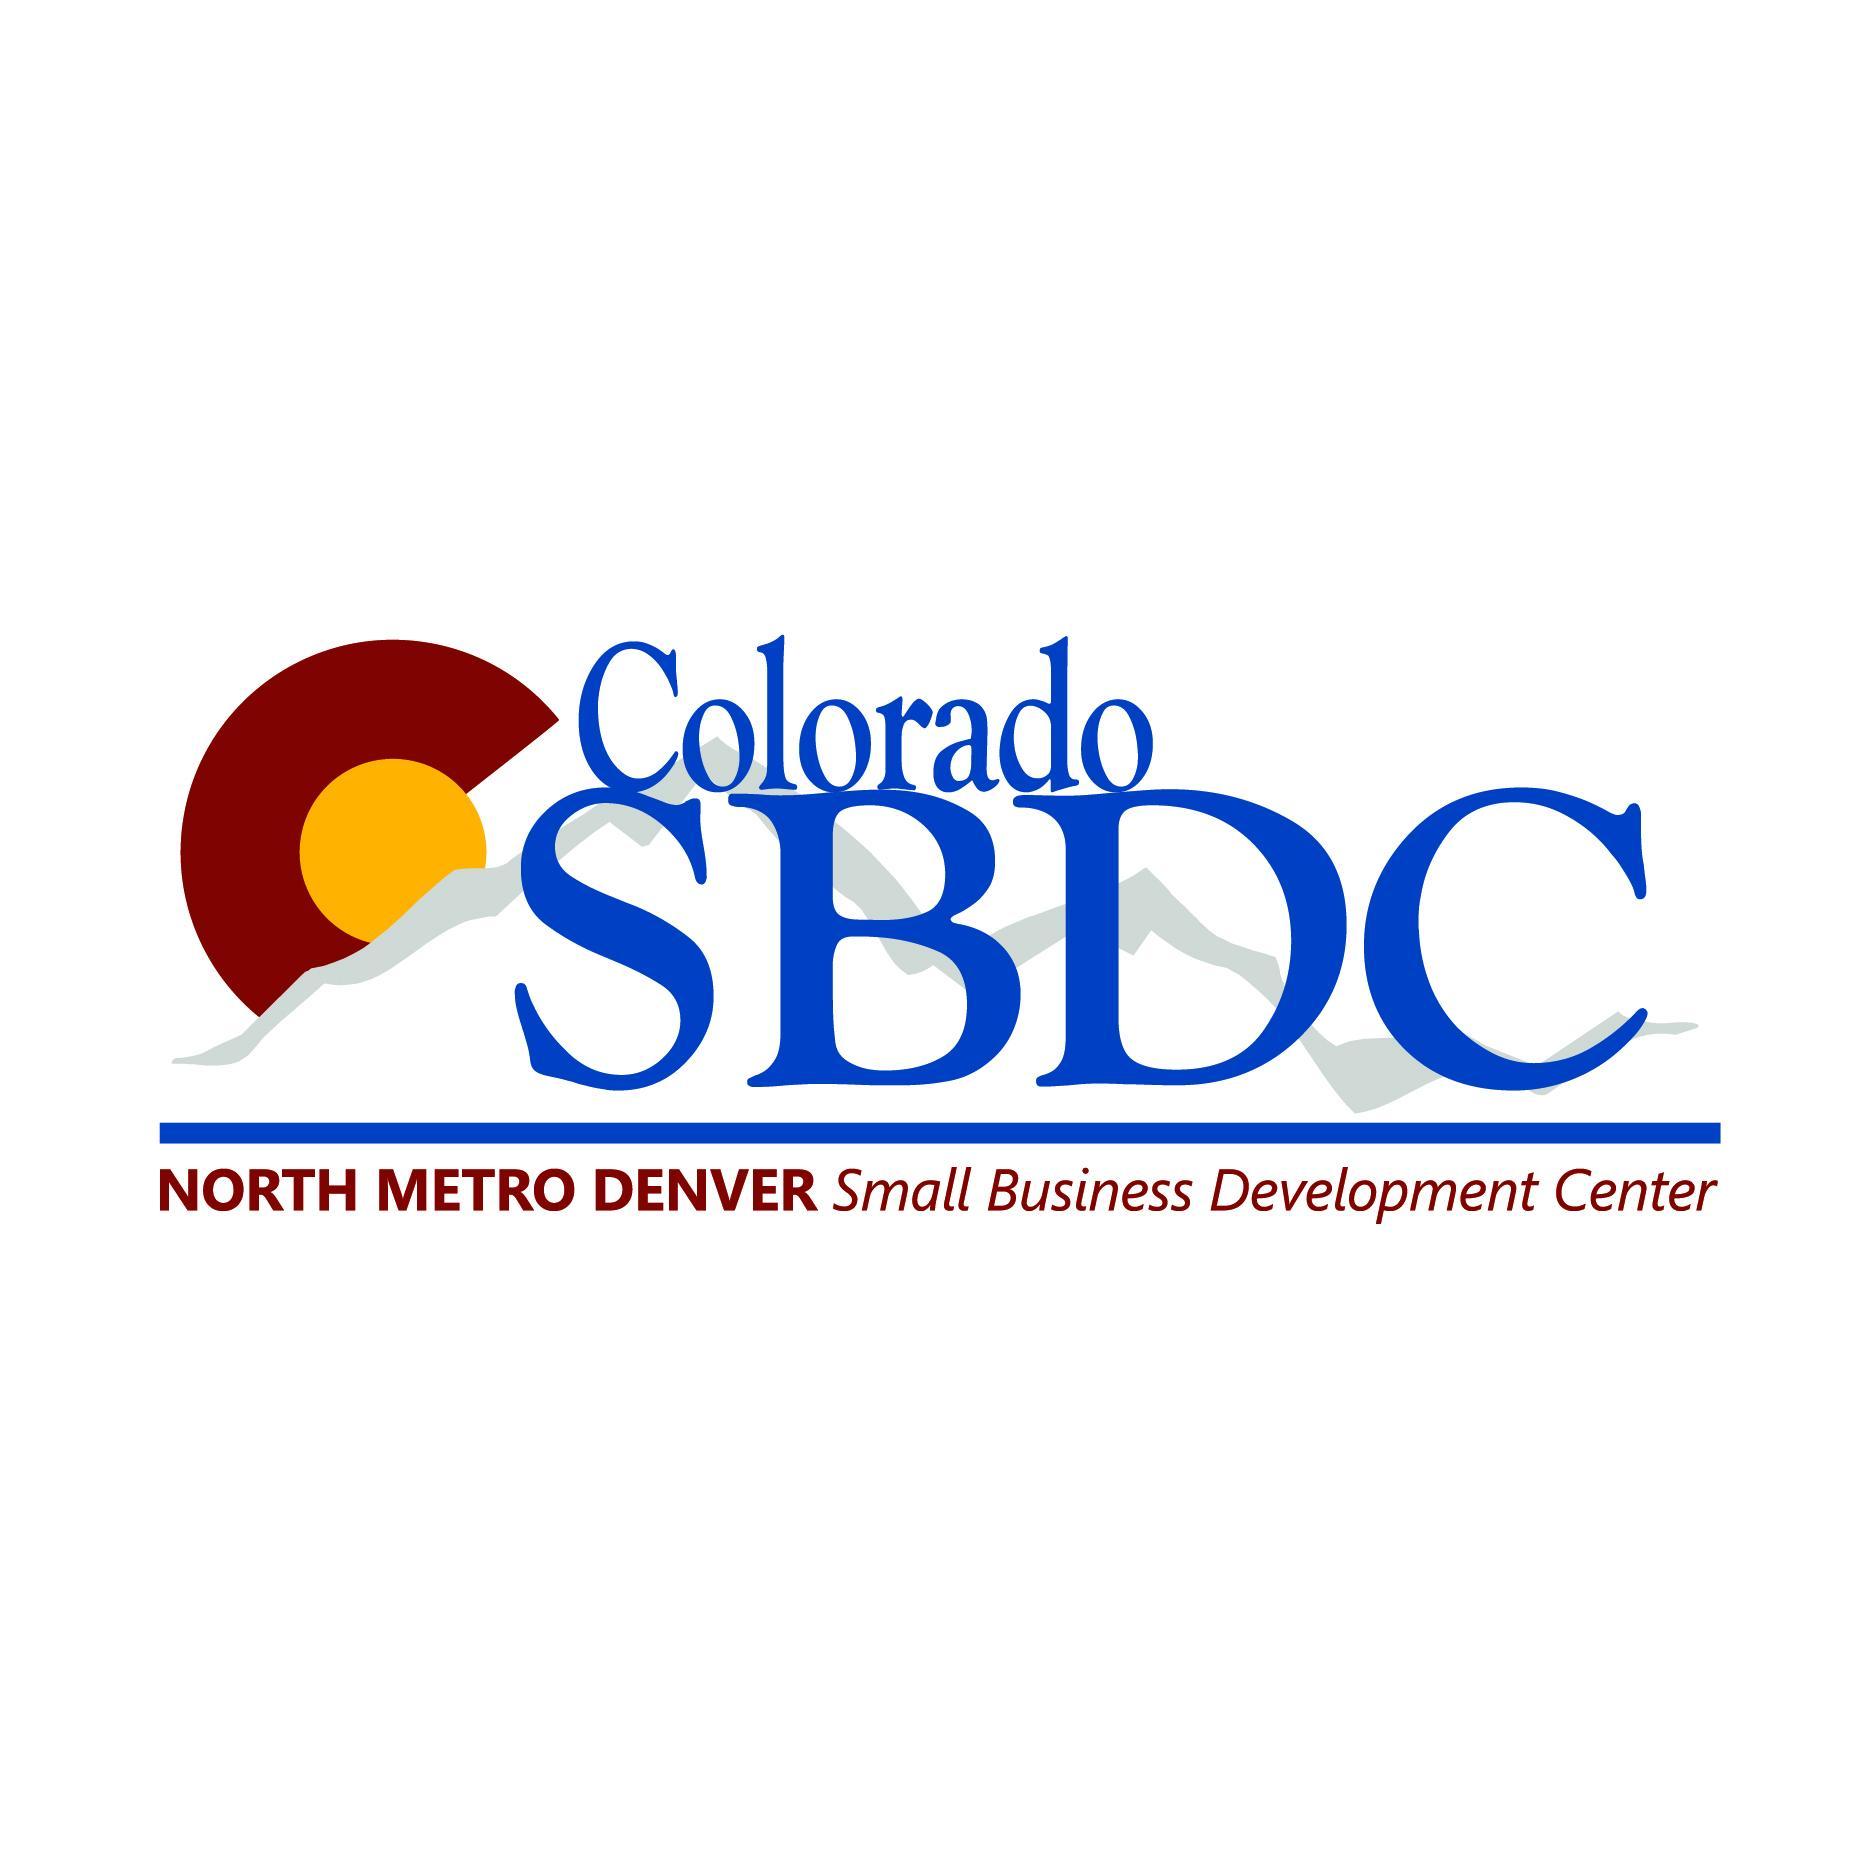 North Metro Denver SBDC....helping Small Business Start, Grow and Prosper!